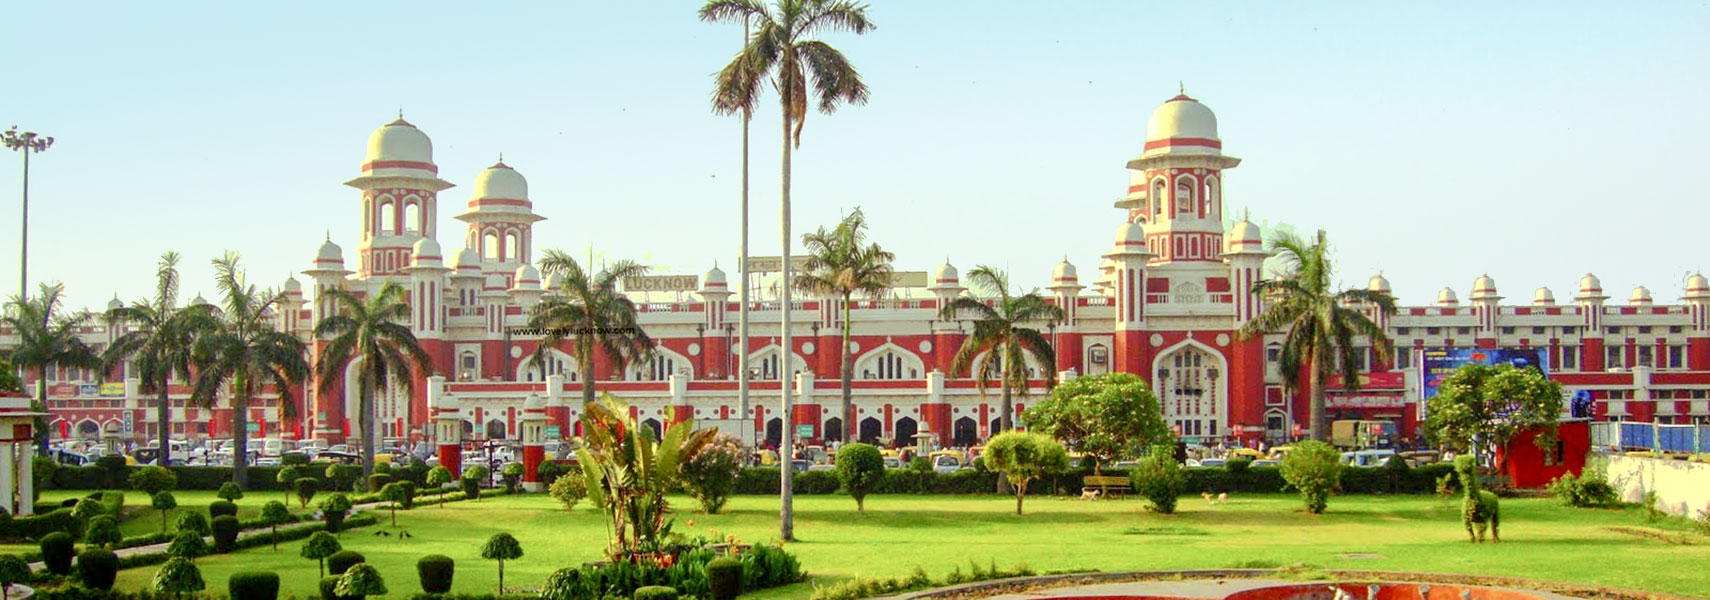 Lucknow Charbagh railway station